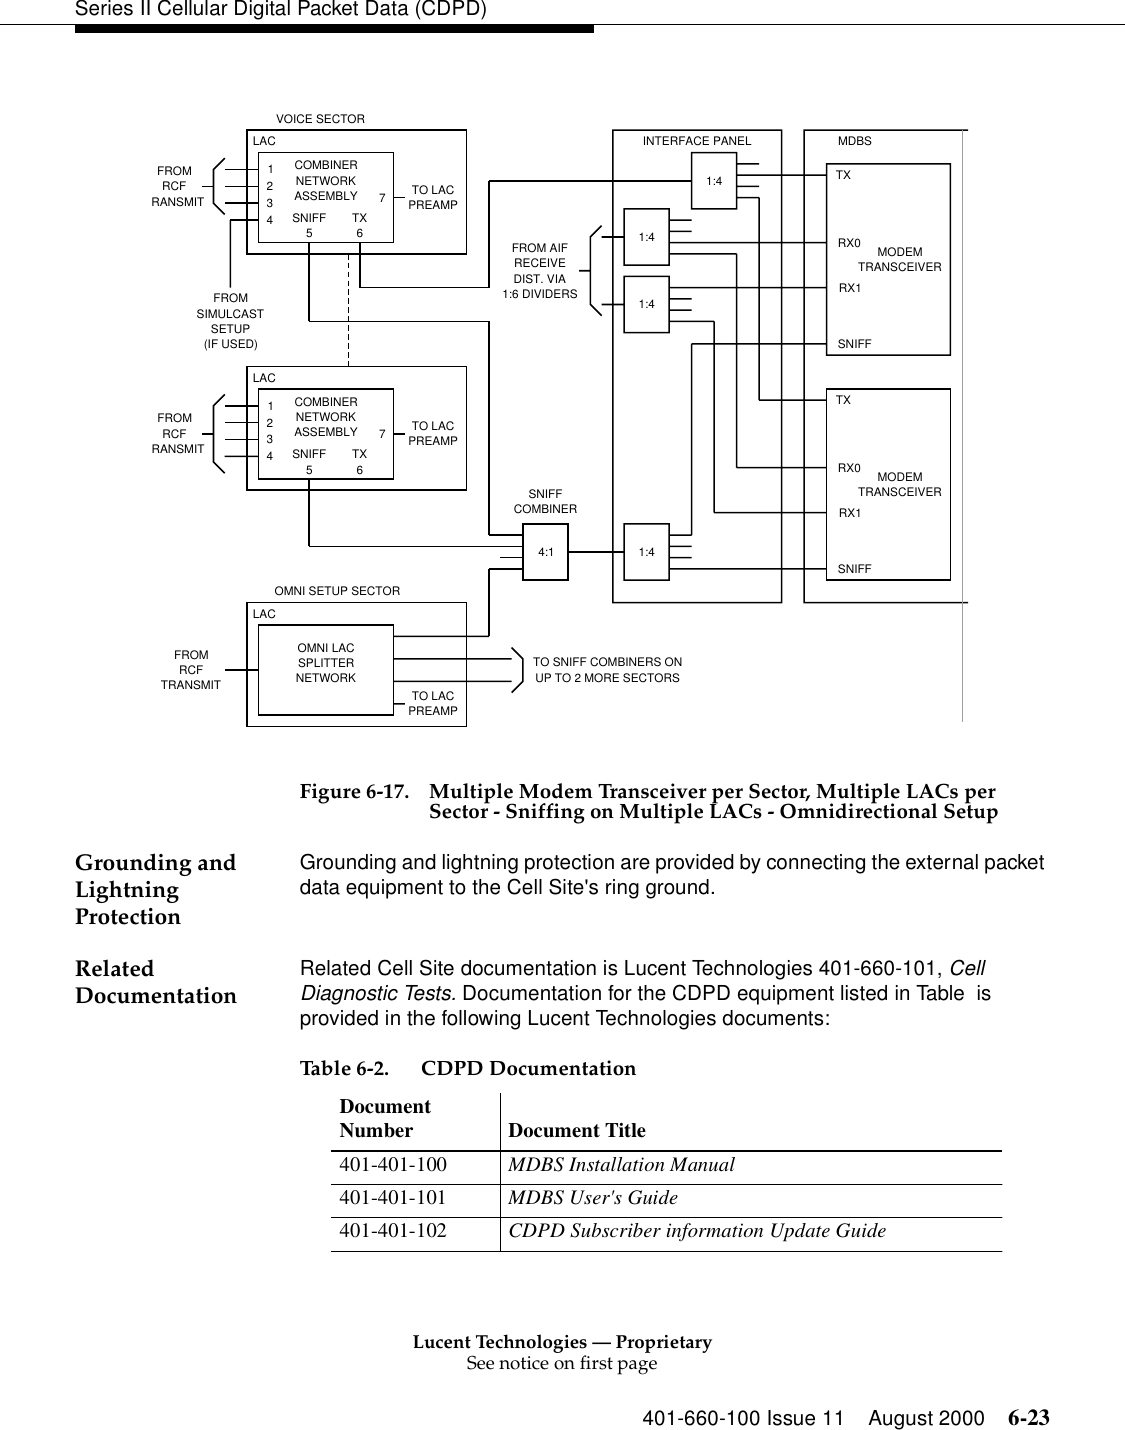 Lucent Technologies — ProprietarySee notice on first page401-660-100 Issue 11 August 2000 6-23Series II Cellular Digital Packet Data (CDPD)Figure 6-17. Multiple Modem Transceiver per Sector, Multiple LACs per Sector - Sniffing on Multiple LACs - Omnidirectional SetupGrounding and Lightning ProtectionGrounding and lightning protection are provided by connecting the external packet data equipment to the Cell Site&apos;s ring ground. Related Documentation Related Cell Site documentation is Lucent Technologies 401-660-101, Cell Diagnostic Tests. Documentation for the CDPD equipment listed in Table  is provided in the following Lucent Technologies documents:VOICE SECTORLAC123474:1INTERFACE PANEL MDBSTXRX0RX1SNIFFFROMRCFRANSMITCOMBINERNETWORKASSEMBLYSNIFF5TX6LACFROMRCFRANSMITLACFROMRCFTRANSMITOMNI SETUP SECTORTO LACPREAMPTO LACPREAMPTO LACPREAMPTO SNIFF COMBINERS ONUP TO 2 MORE SECTORSFROM AIFRECEIVEDIST. VIA1:6 DIVIDERSMODEMTRANSCEIVERTXRX0RX1SNIFFMODEMTRANSCEIVER1:41:41:41:4SNIFFCOMBINERFROMSIMULCASTSETUP(IF USED)12347COMBINERNETWORKASSEMBLYSNIFF5TX6OMNI LACSPLITTERNETWORKTable 6-2. CDPD Documentation Document Number Document Title401-401-100  MDBS Installation Manual 401-401-101  MDBS User&apos;s Guide 401-401-102  CDPD Subscriber information Update Guide 